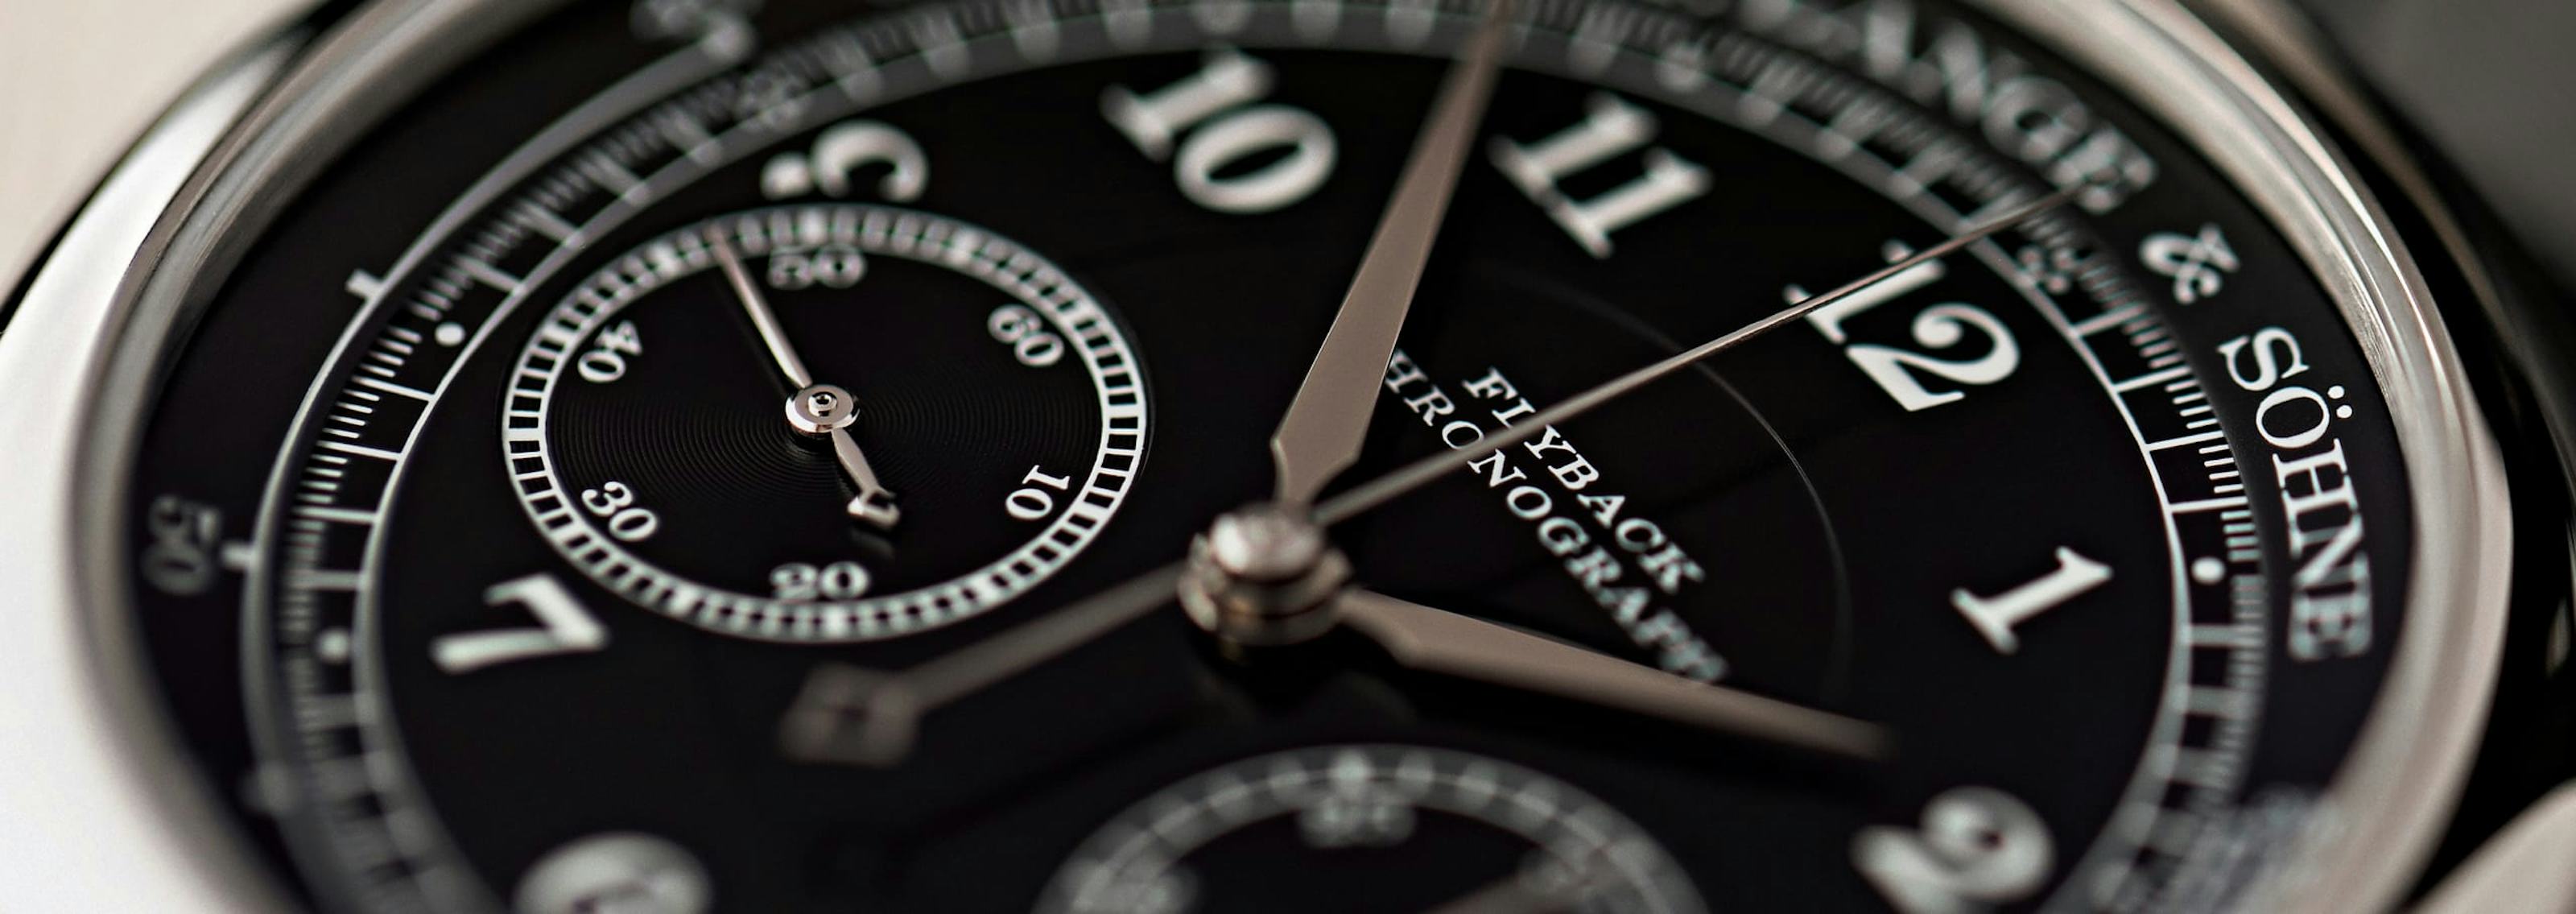 An In-Depth Look at the A. Lange &#038; Söhne 1815 Chronograph “Darth”